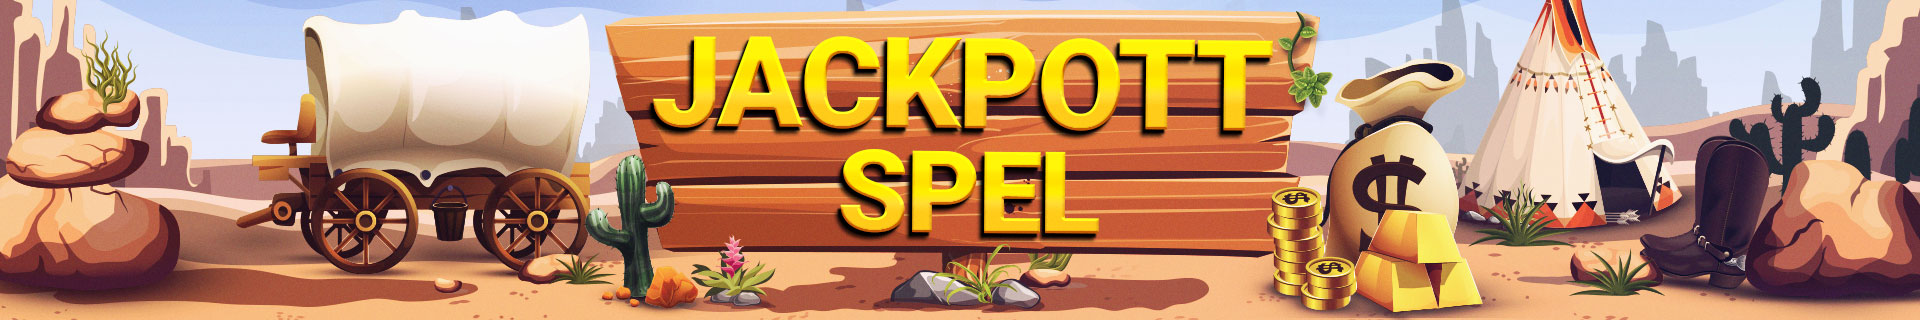 Online Jackpot Games Play Free